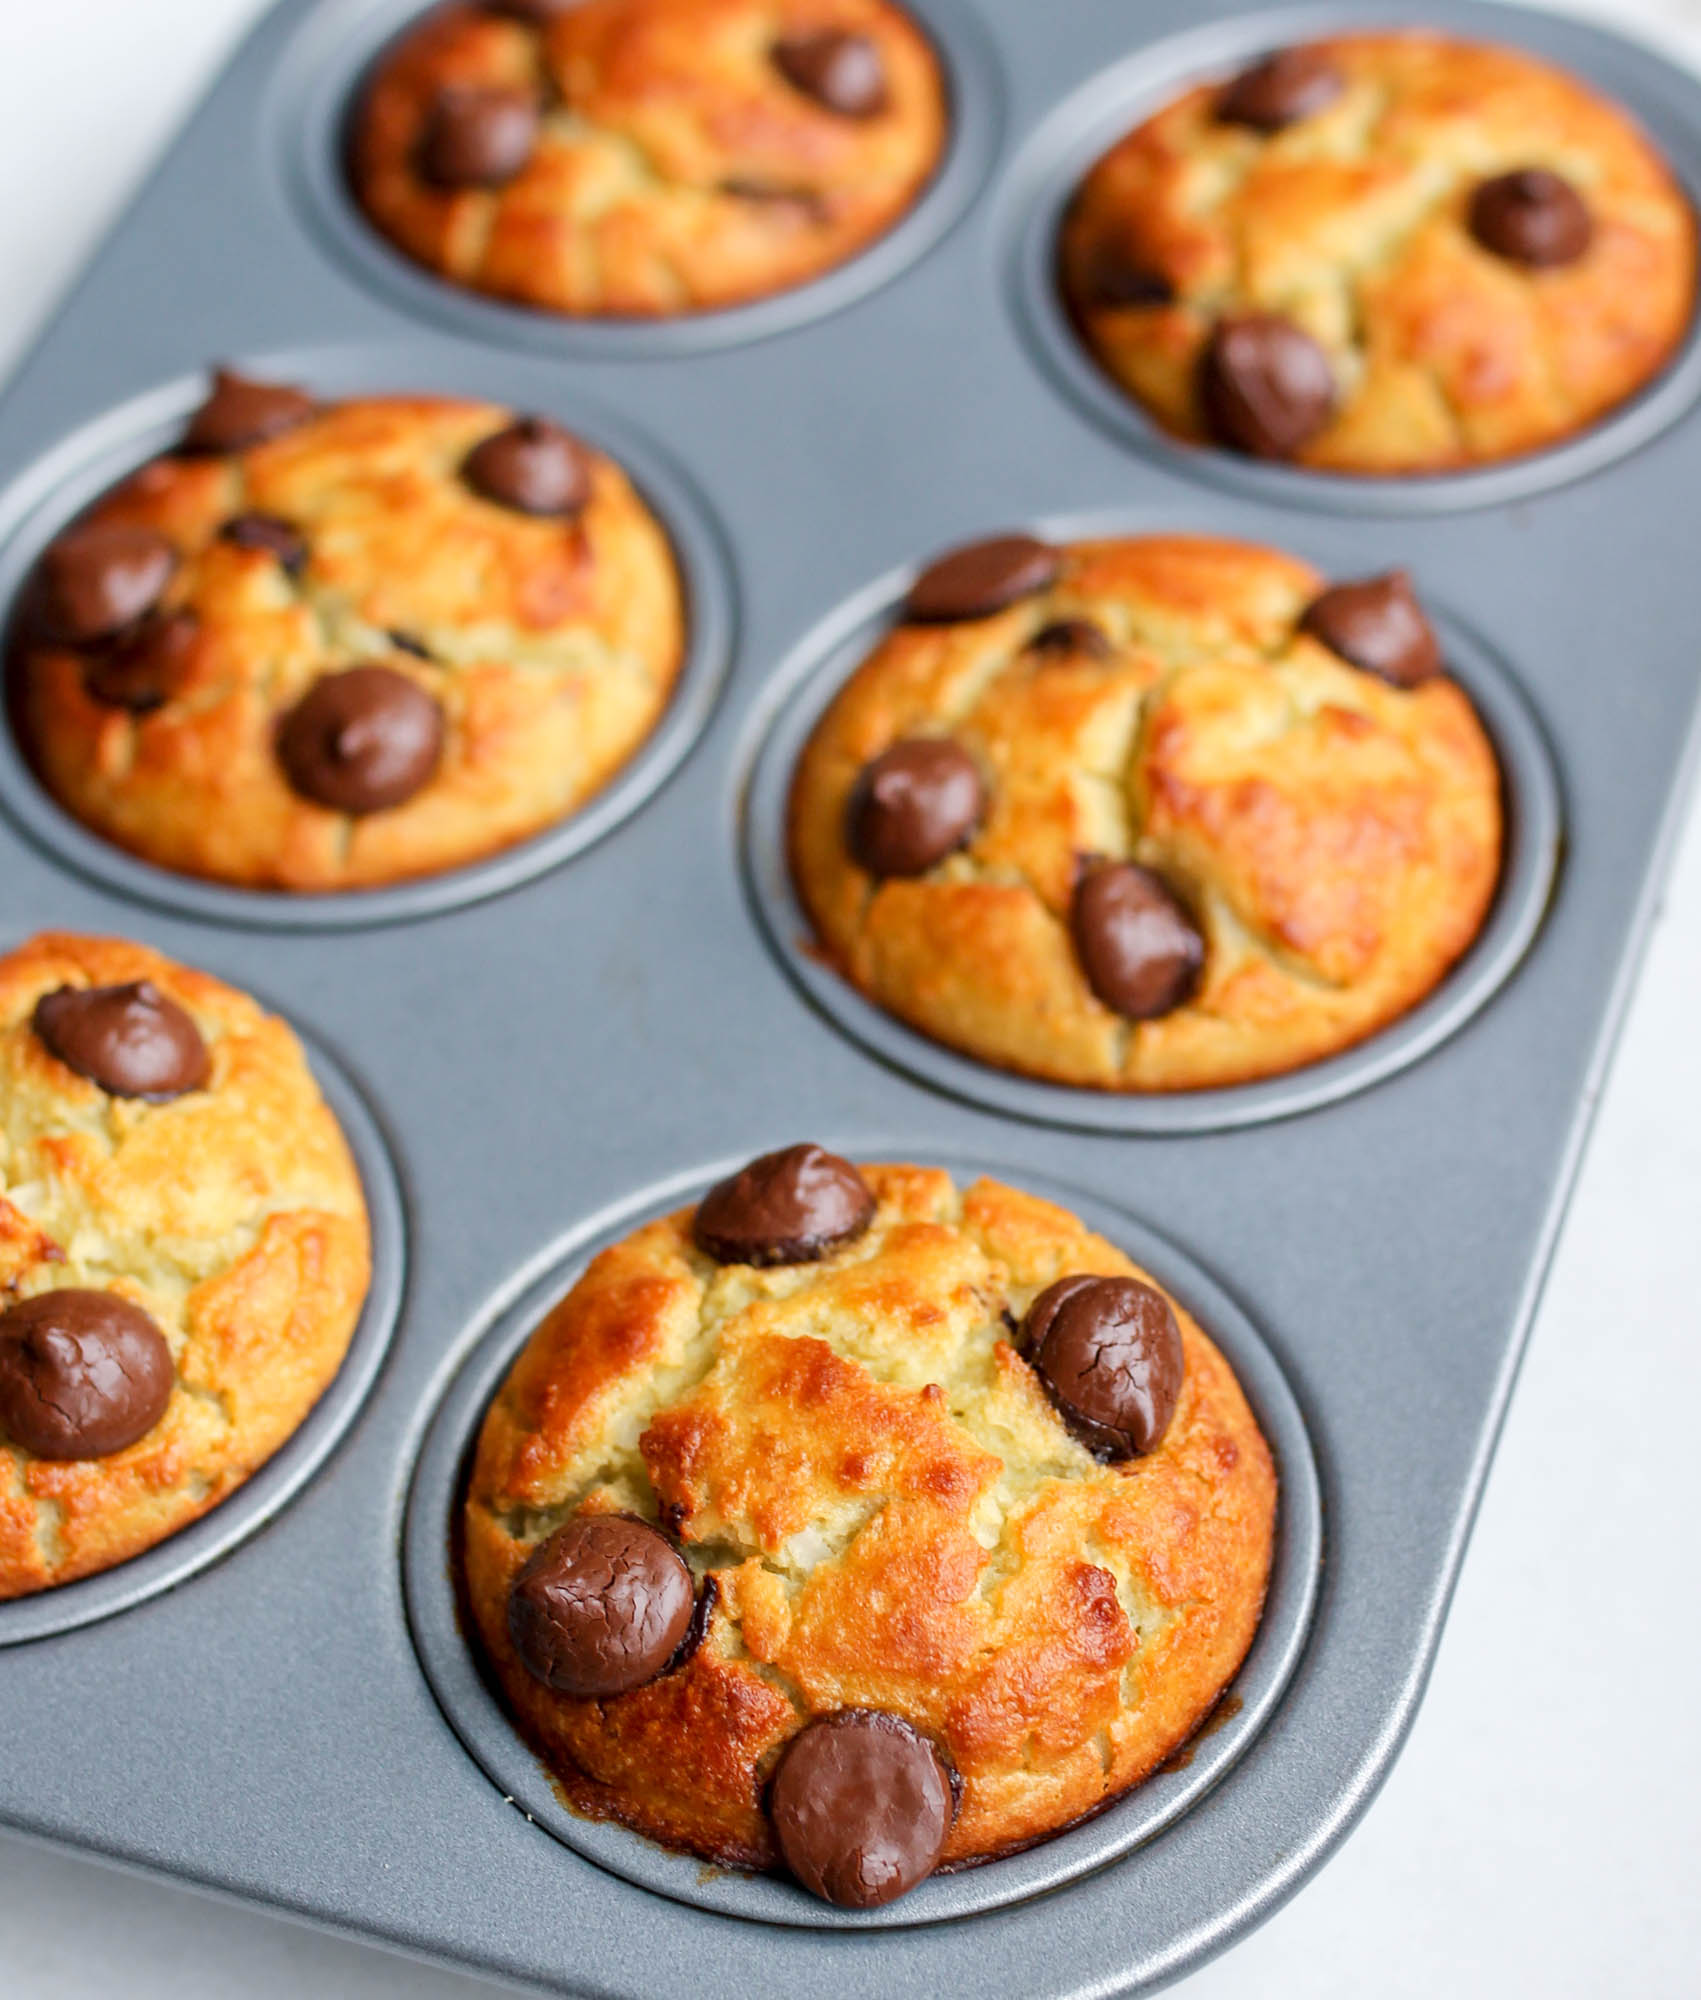 5-Minute Blender Paleo Banana Muffins with Chocolate Chips and Coconut